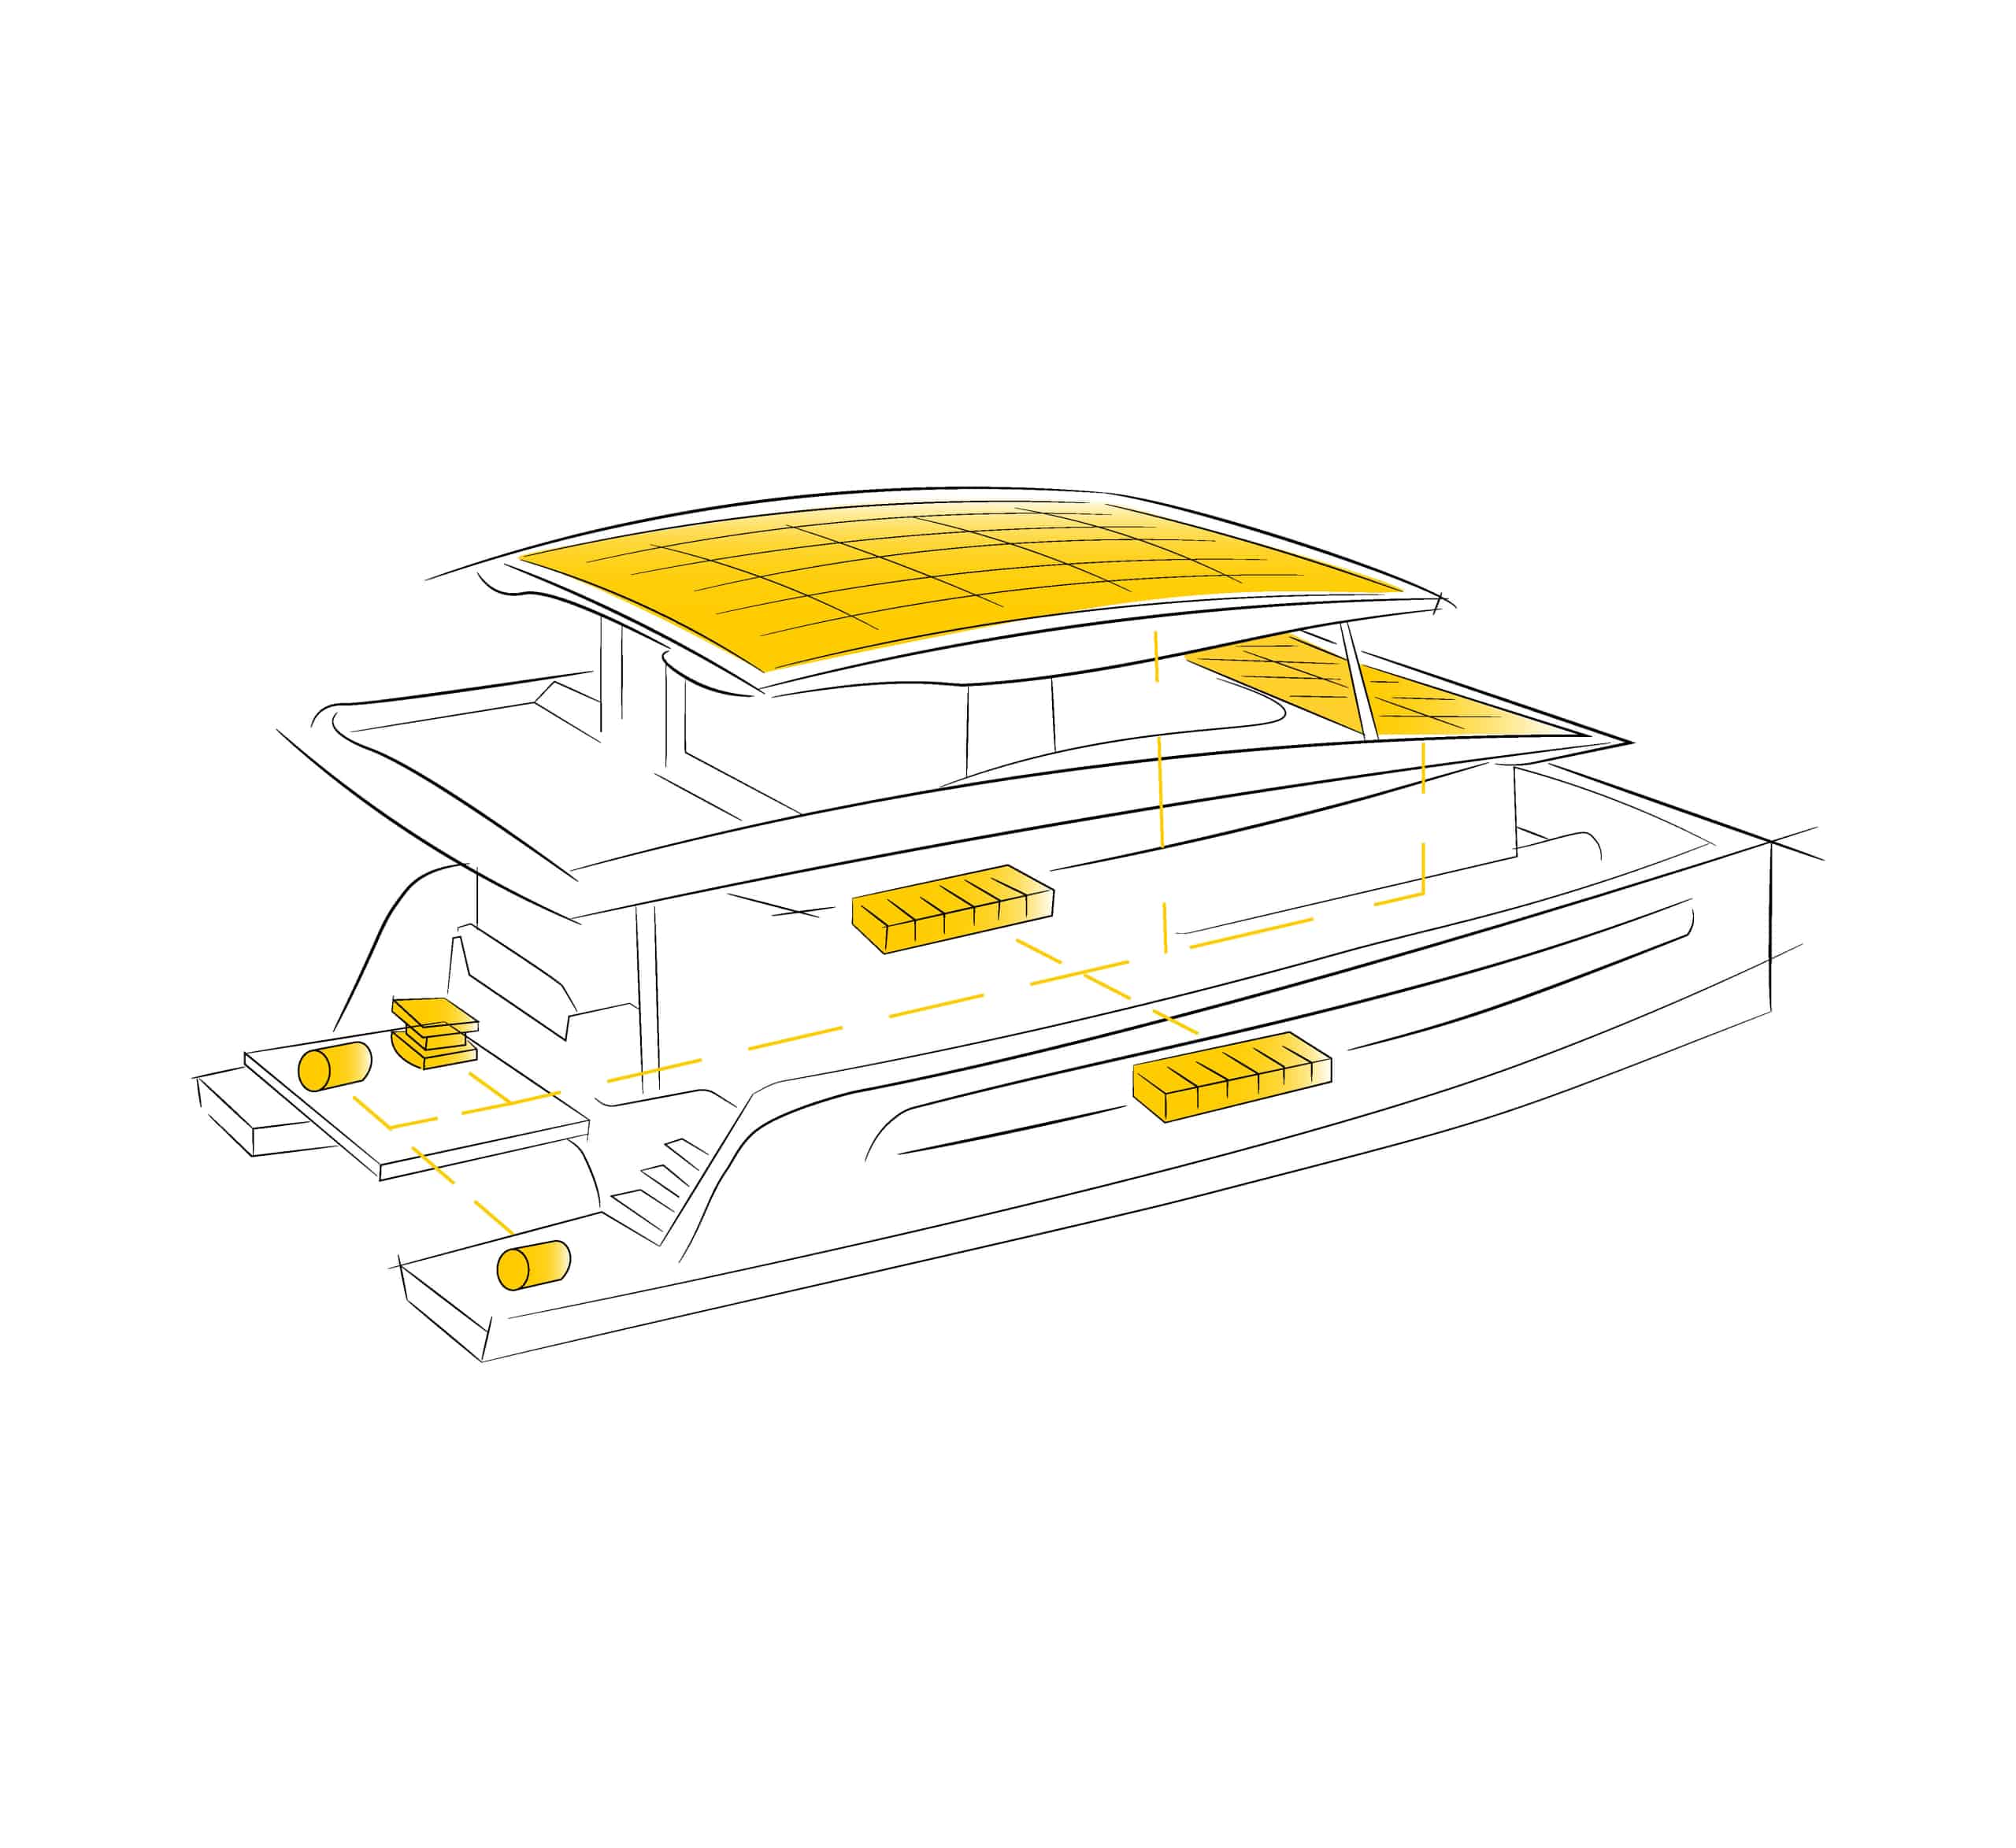 graphic of the connections between solar panels, batteries and motors of an electric yacht